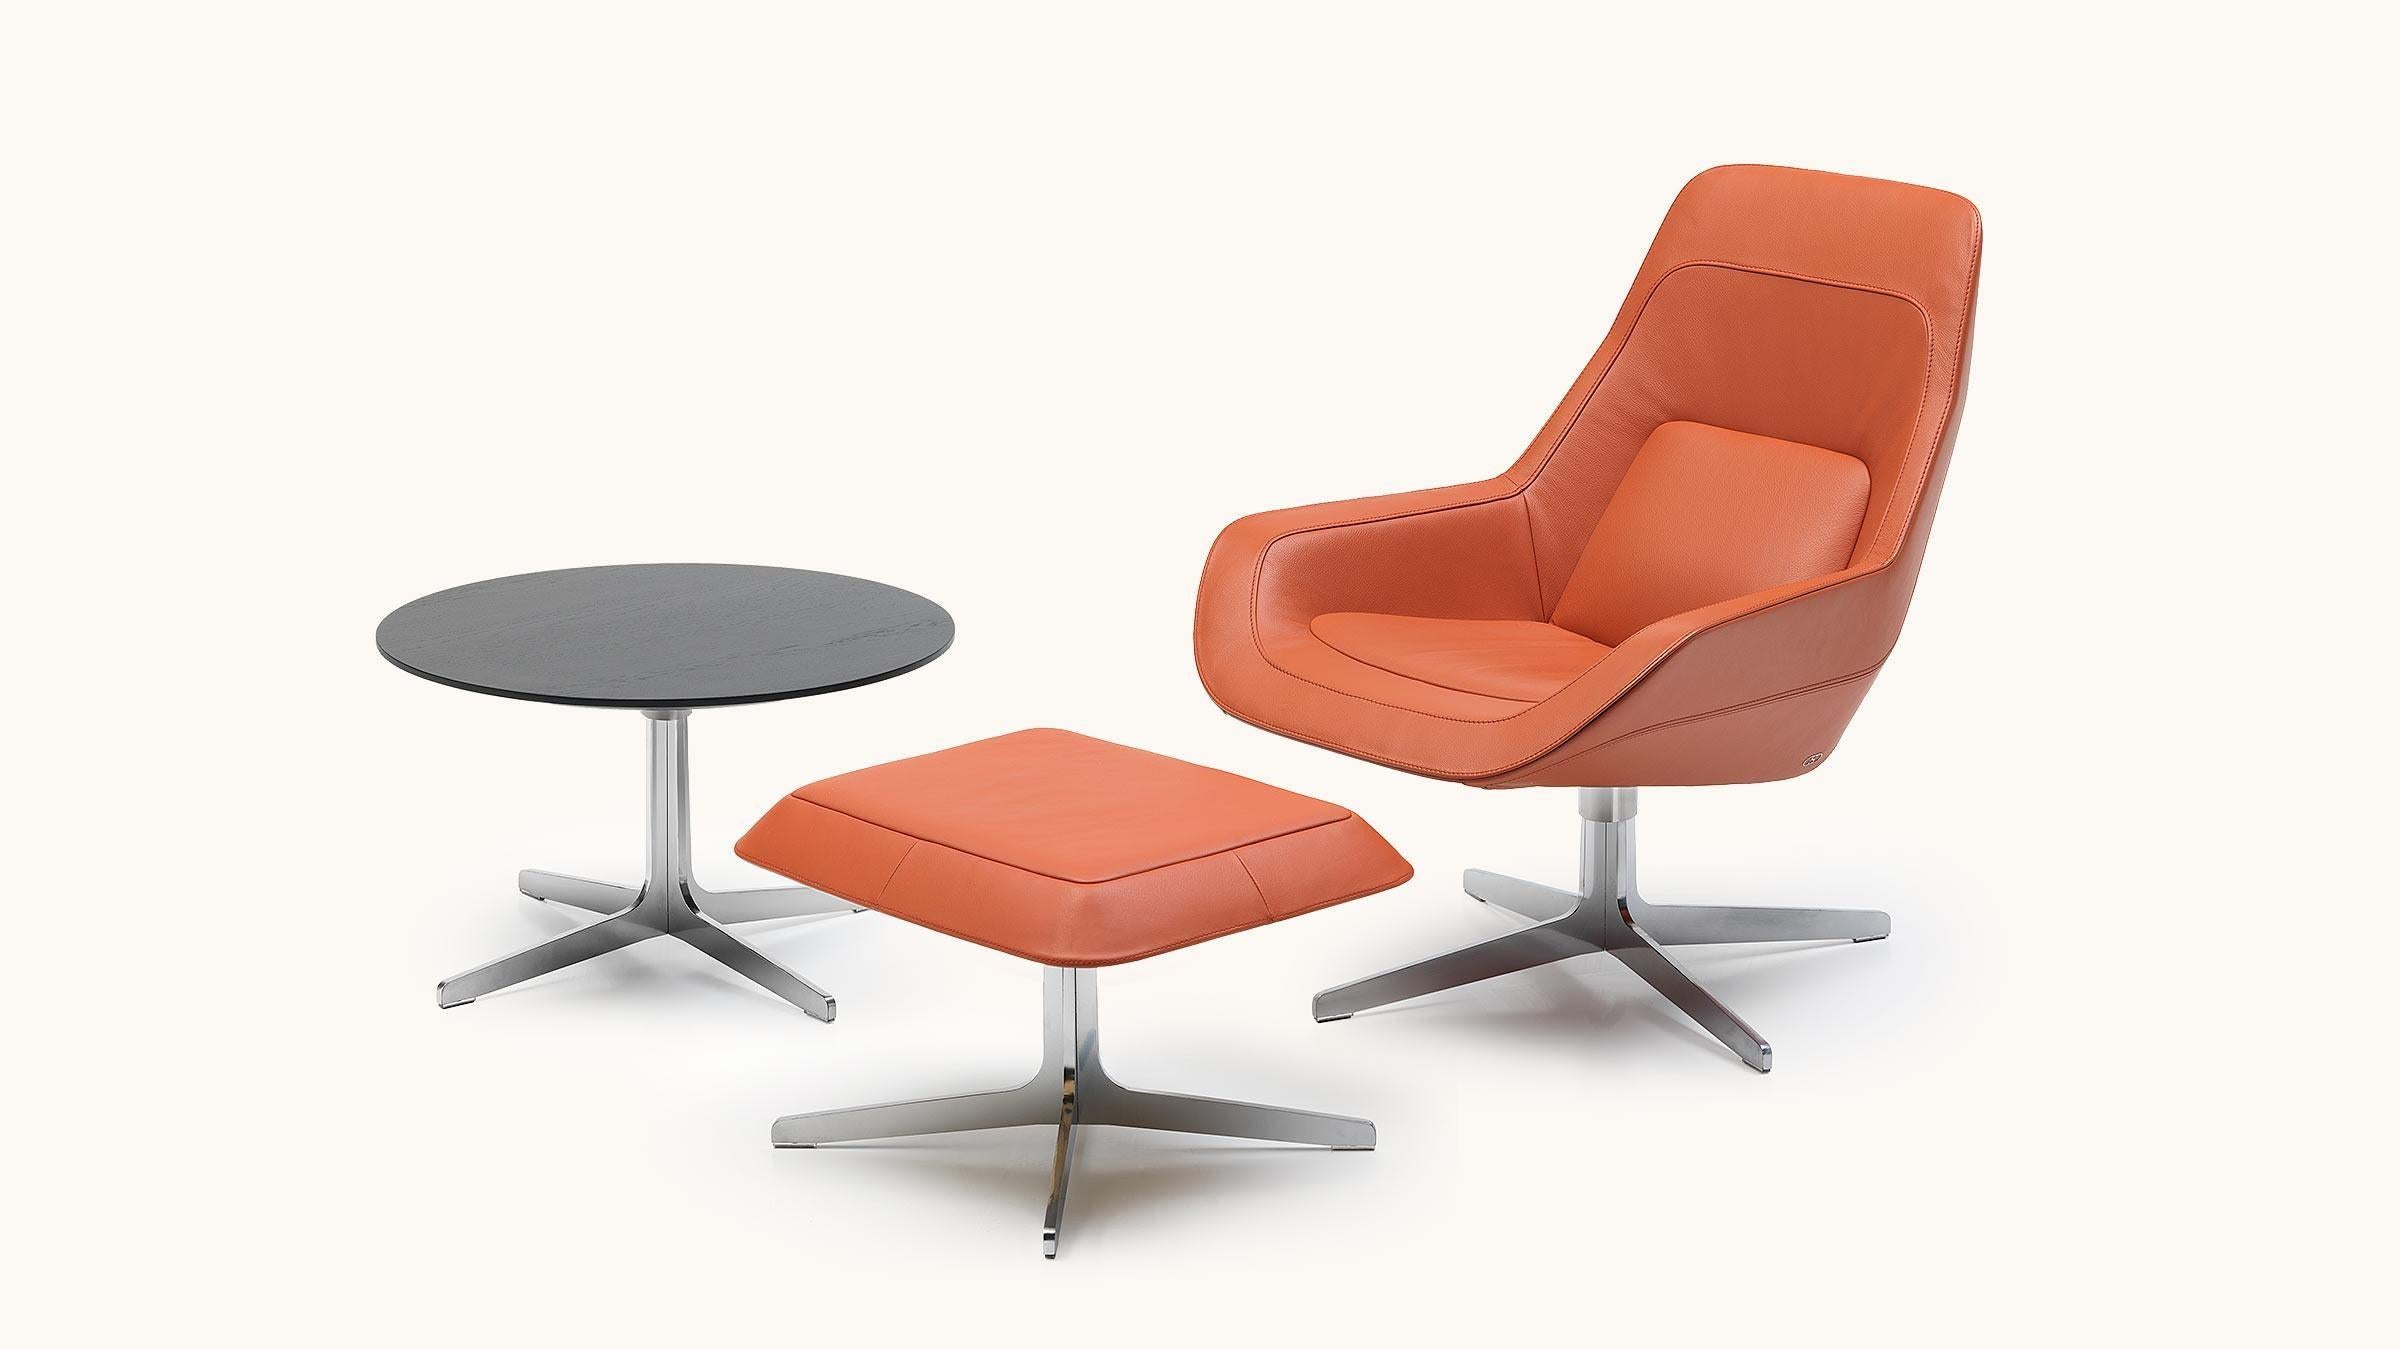 Modern De Sede DS-144 Armchair in Maine Orange Upholstery by Werner Aisslinger For Sale